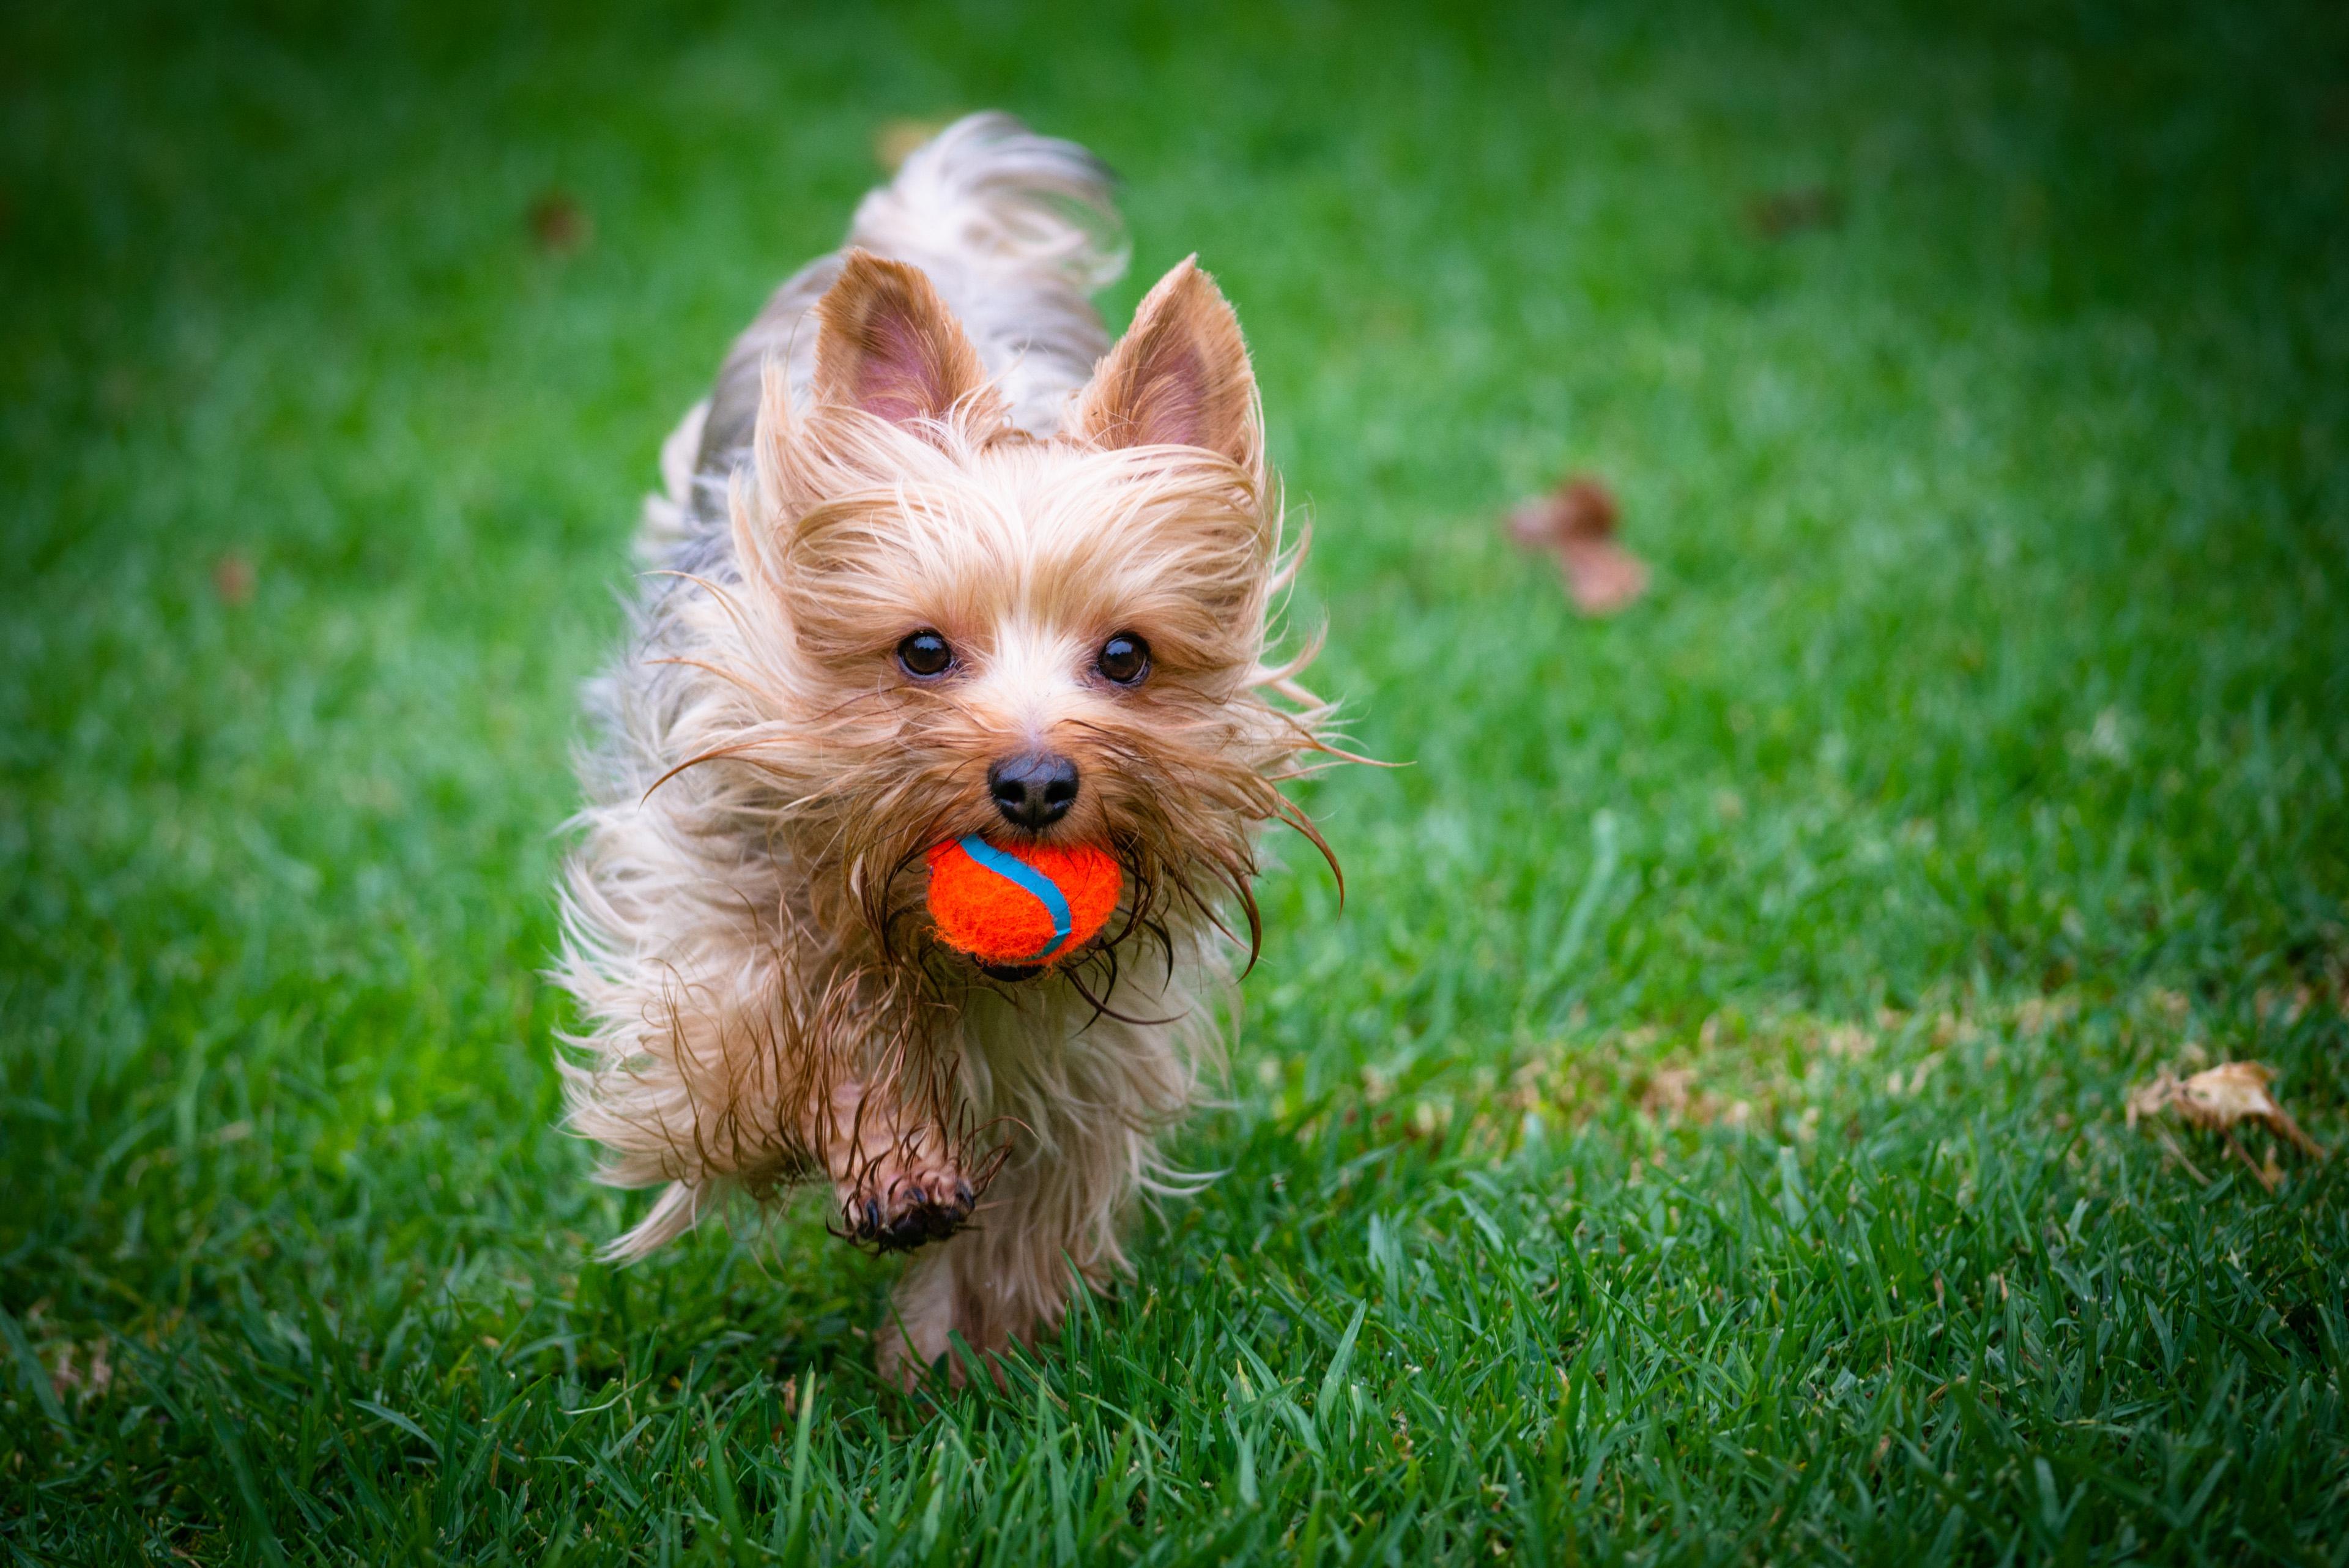 Photo Detailing a Yorkie Playing with a Ball